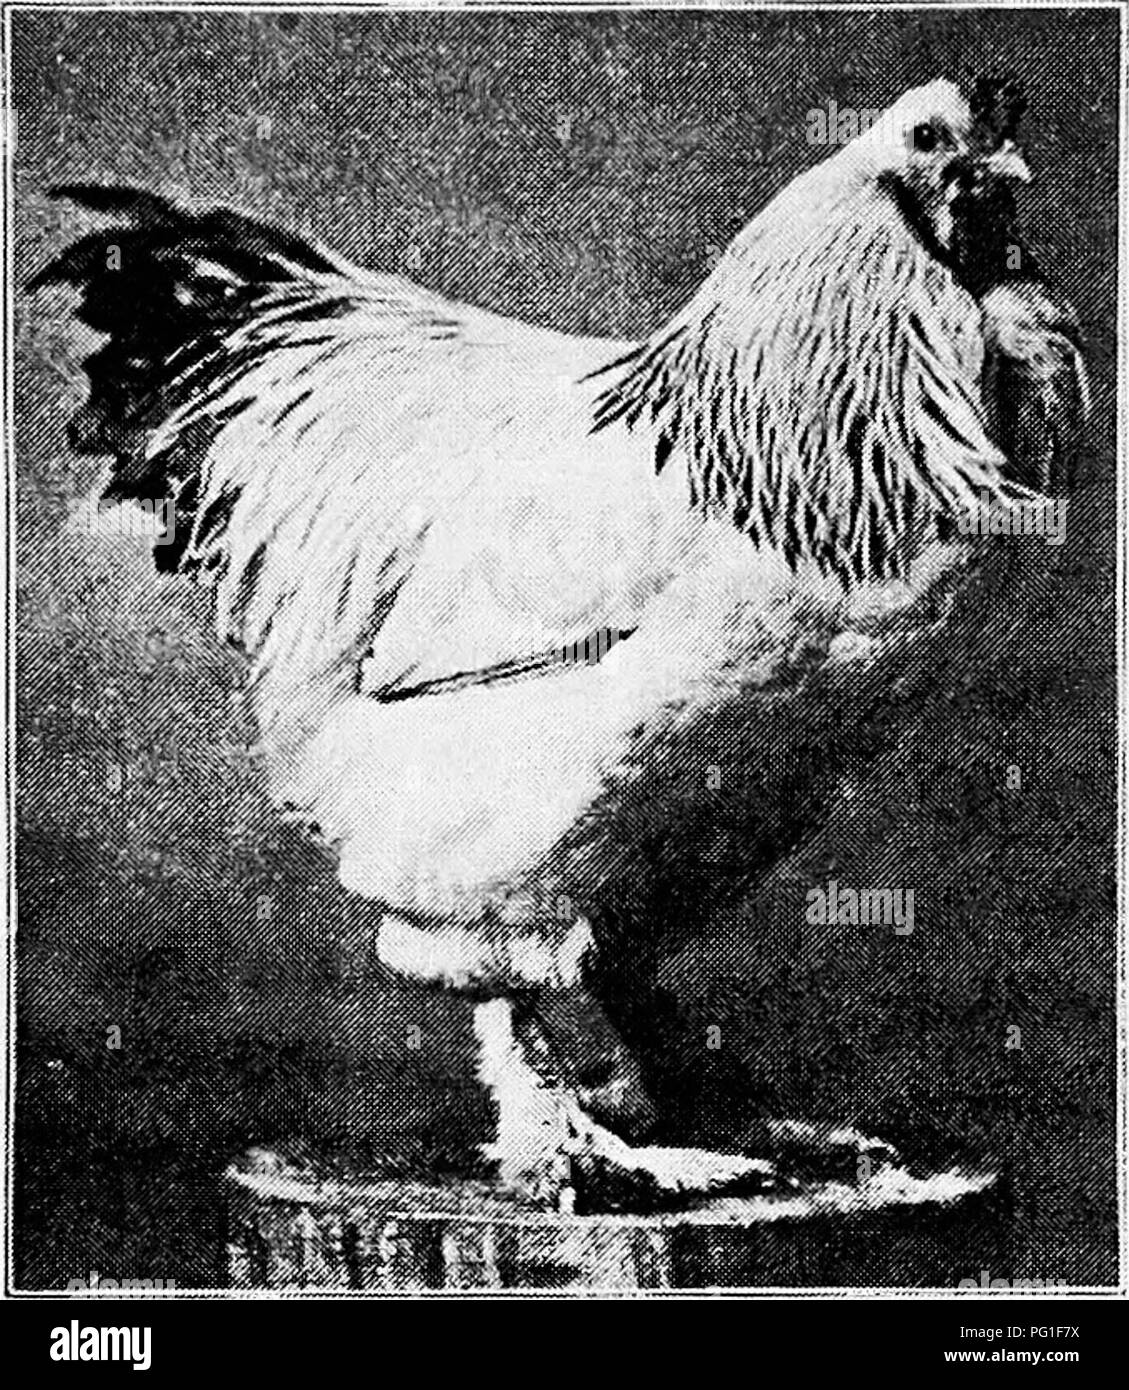 . Principles and practice of poultry culture . Poultry. TYPES, BREEDS, AND VARIETIES OF FOWLS 393. Fig. 390. Light Brahma cockerel. (Photograph from owner, Frank C. Nutter, South Portland, Maine) the black-red to the black- white type of coloration, and still showing, in all but a few rare specimens, traces of brown or red throughout the plumage. The comb is an immaterial point, for not only were Brahmas at first produced with both pea combs and single combs, but also a pea-combed variety of the Partridge Cochin was rec- ognized in the American Standard as late as 1887. The Dark Brahma of to-  Stock Photo